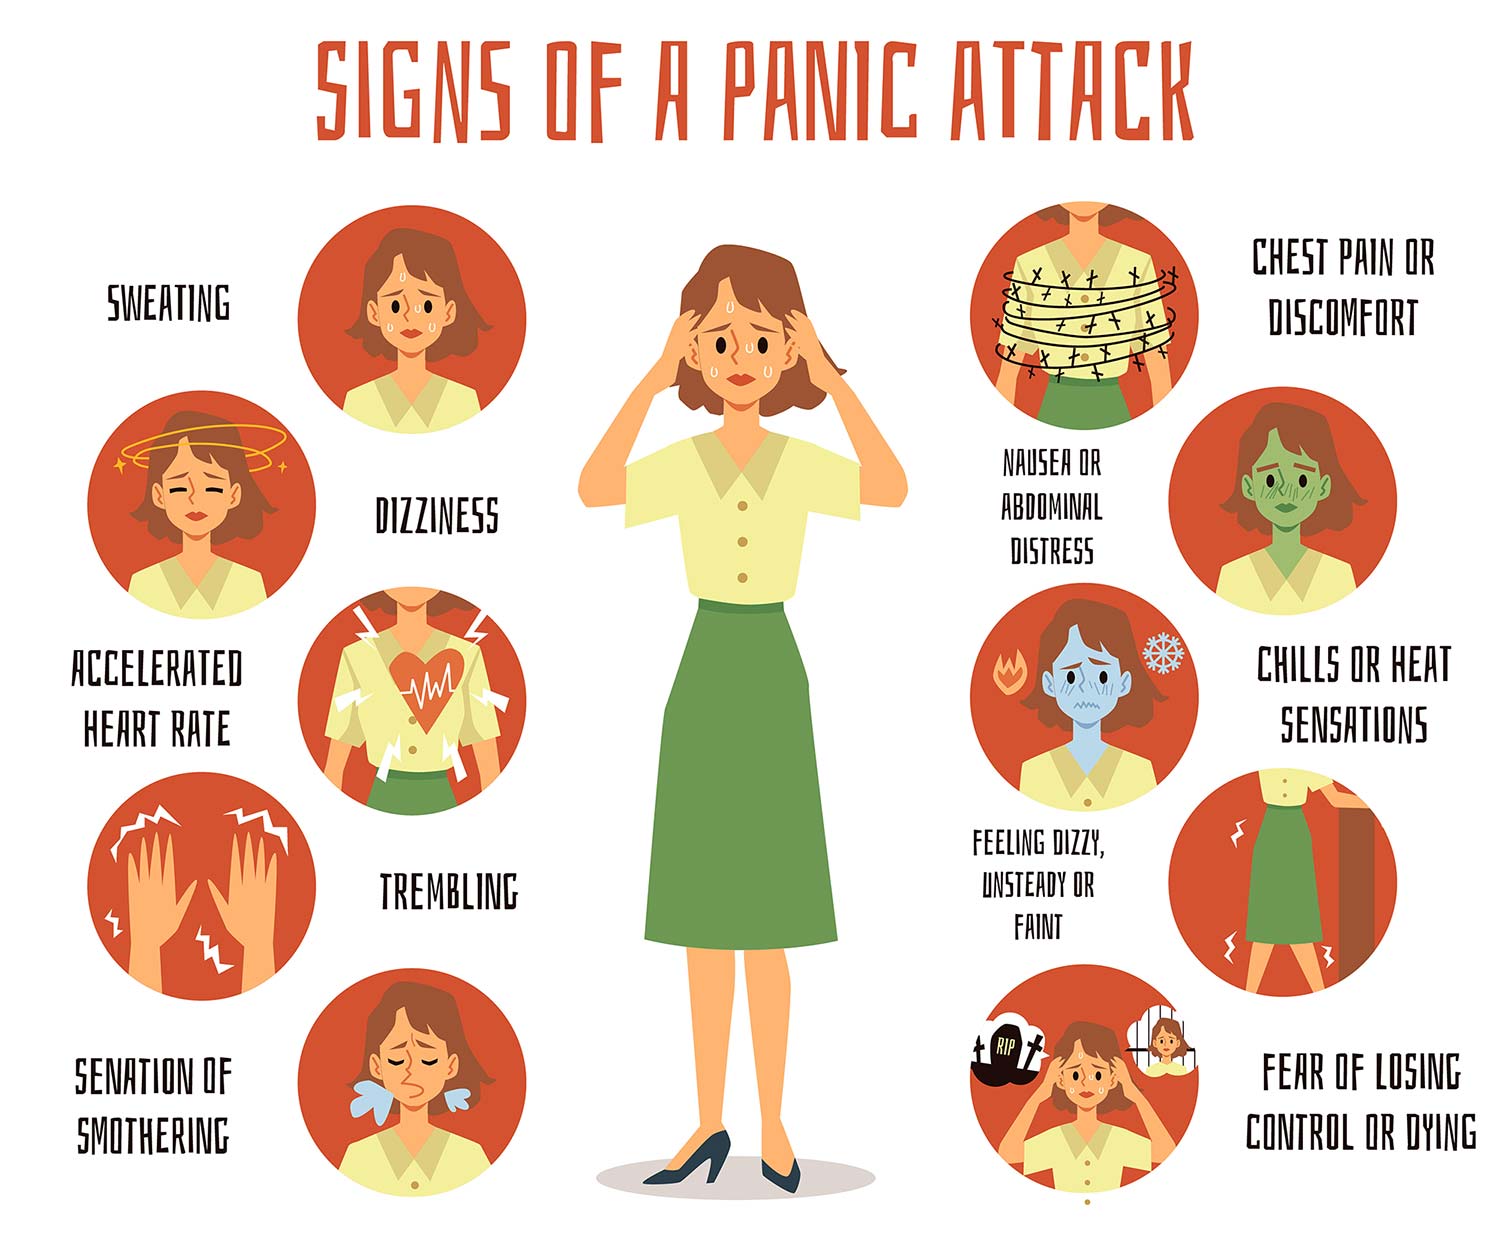 Panic attack symptoms. A panic attack is a sudden episode of intense fear or anxiety that triggers severe physical reactions, such as a racing heart, sweating, trembling, shortness of breath, or a feeling of impending doom, even though there's no real danger or apparent cause.